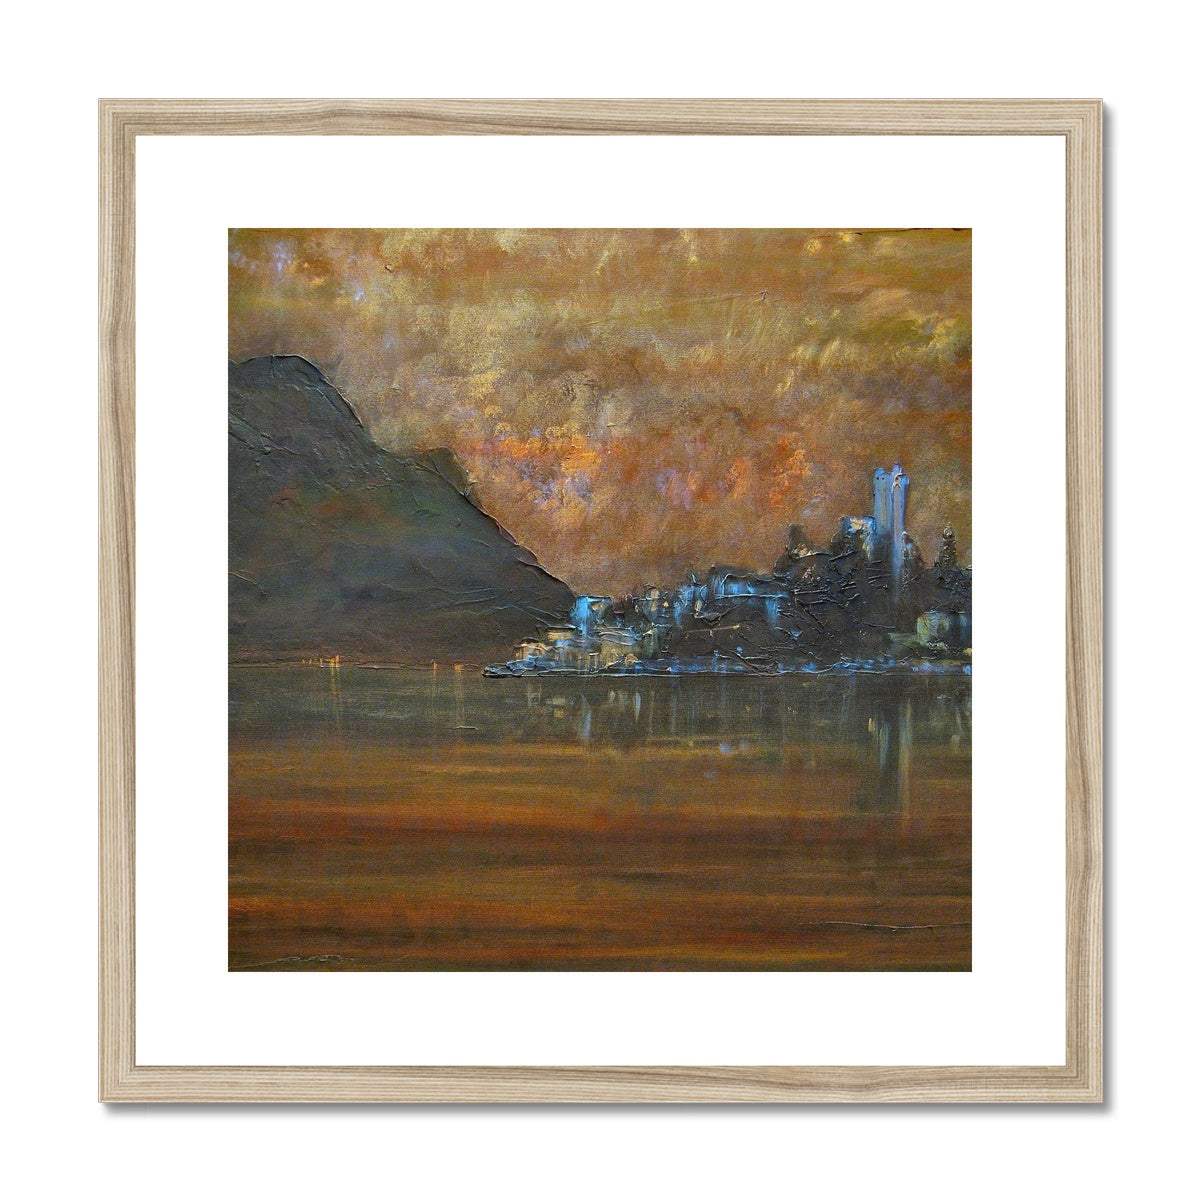 Lake Garda Dusk Italy Painting | Framed & Mounted Prints From Scotland-Framed & Mounted Prints-World Art Gallery-20"x20"-Natural Frame-Paintings, Prints, Homeware, Art Gifts From Scotland By Scottish Artist Kevin Hunter